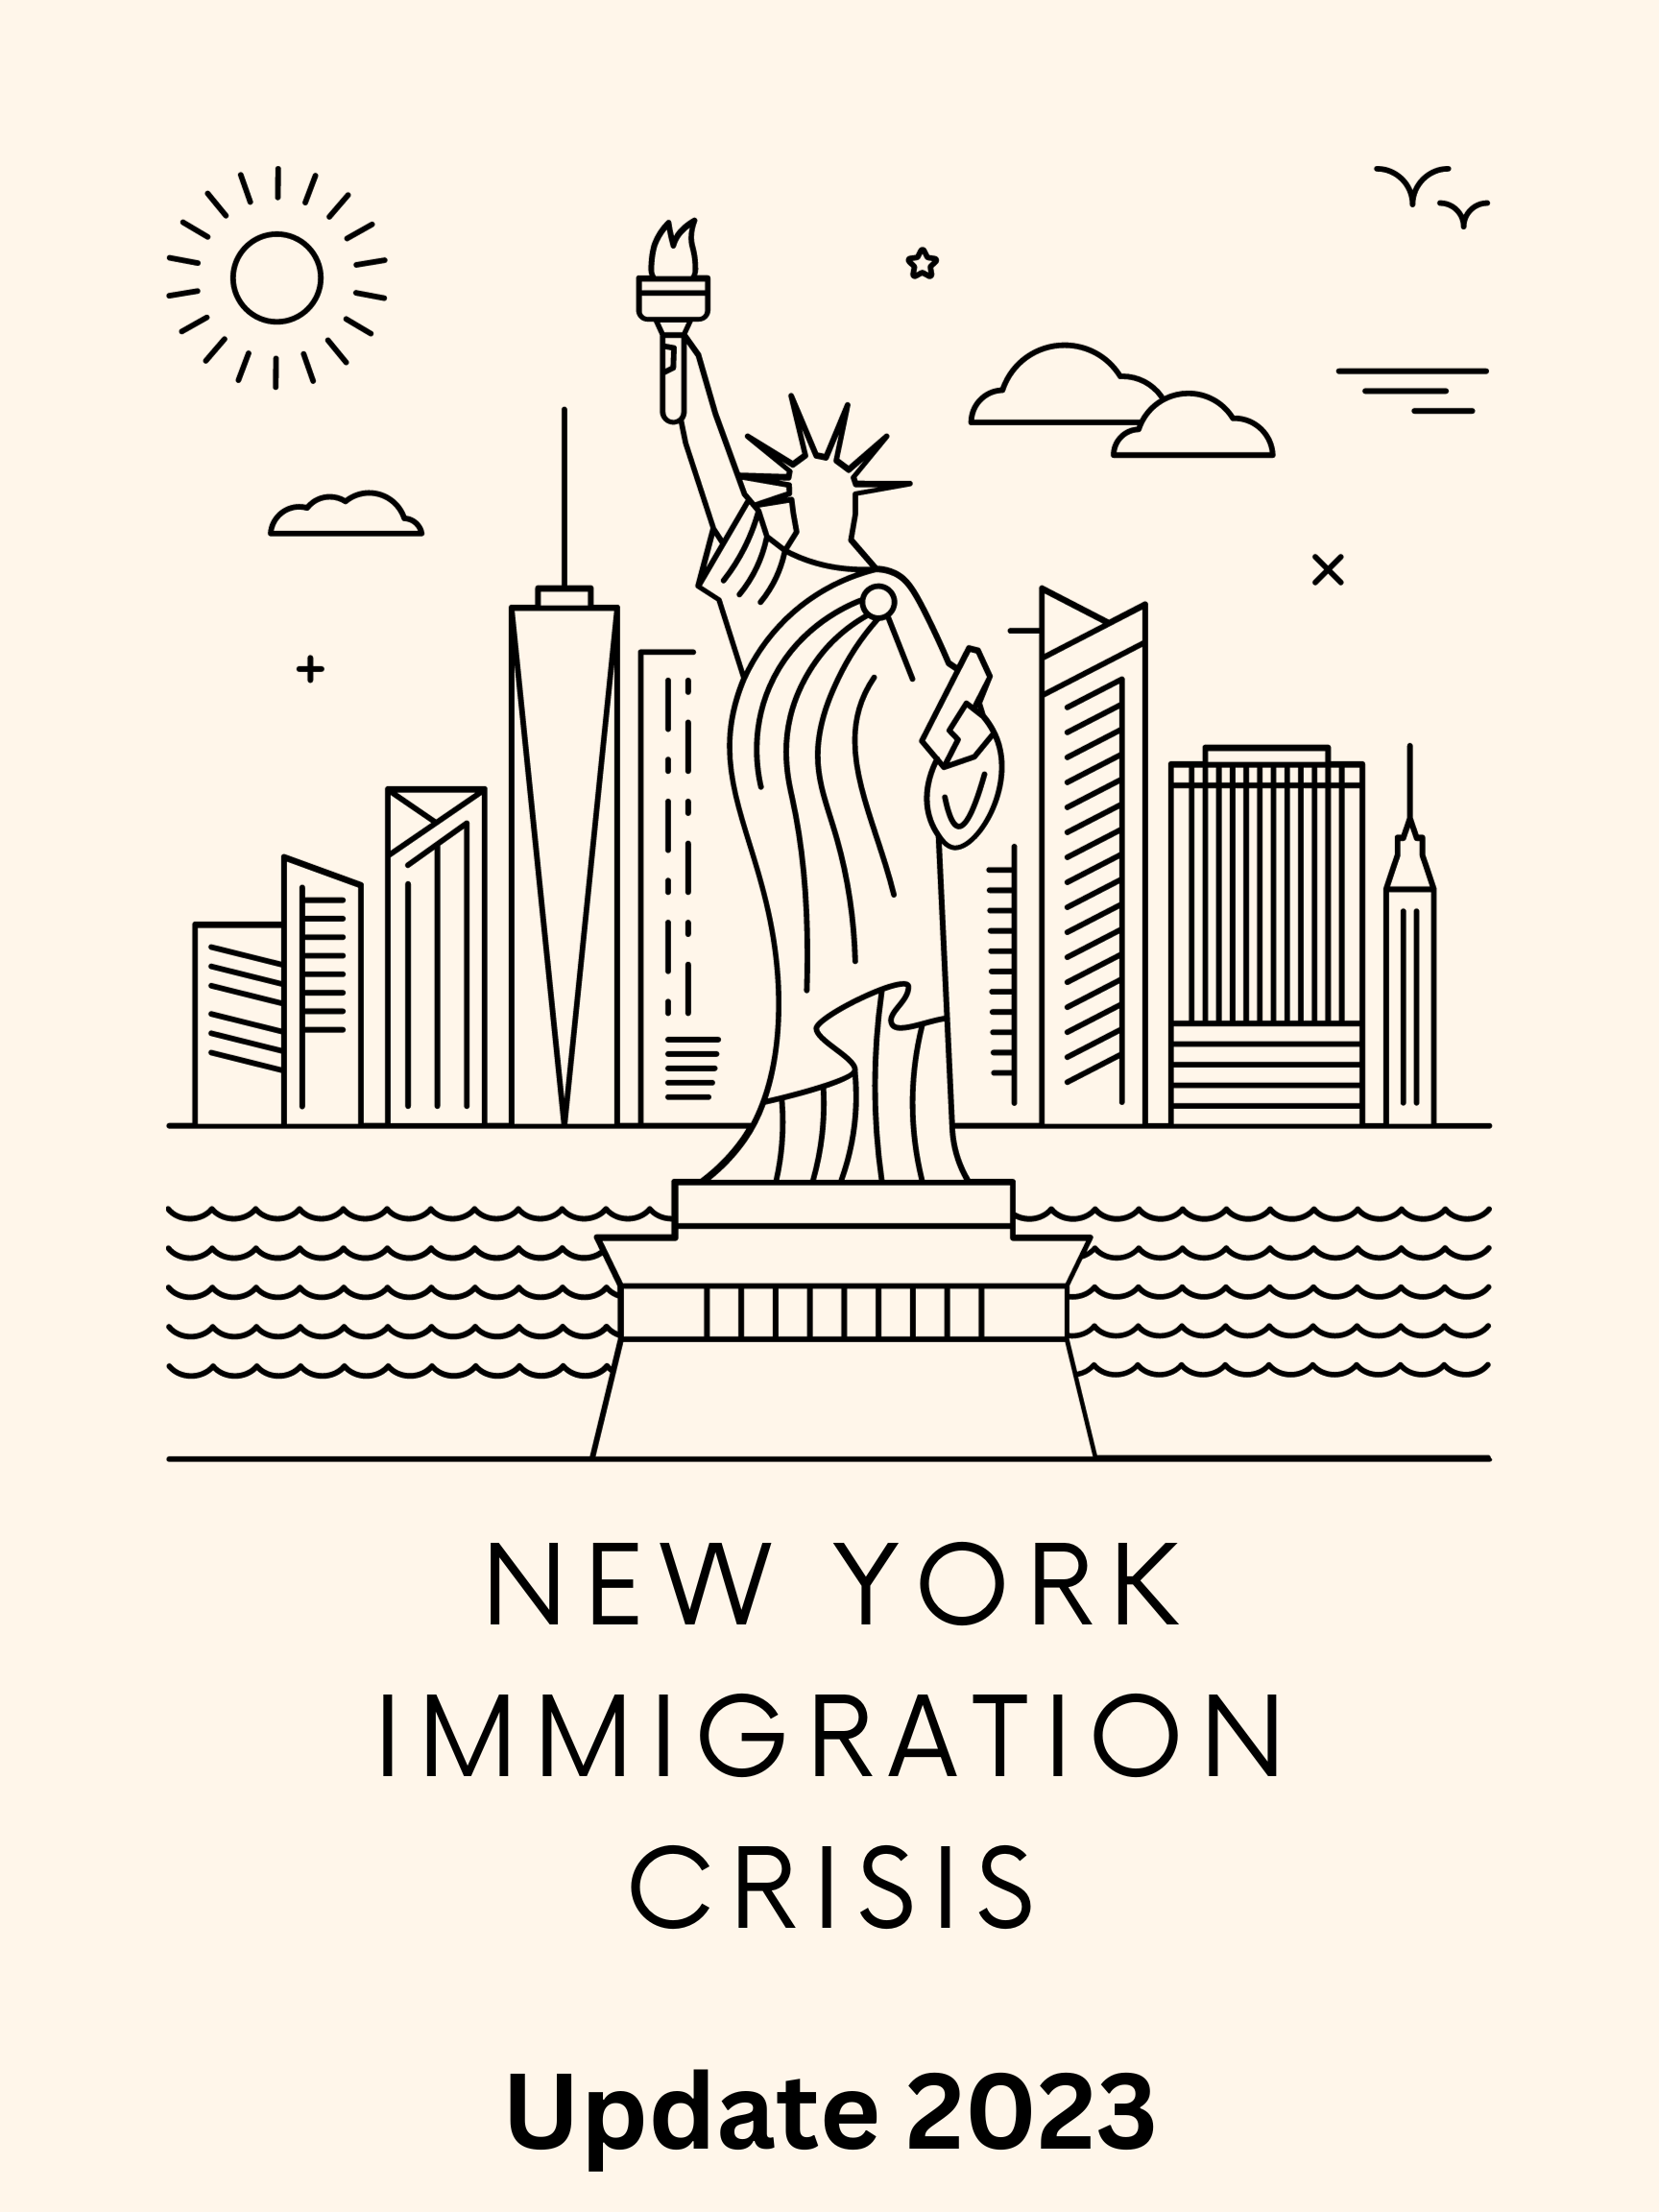 "NYC on the Brink: Unraveling the 2023 Immigration Crisis"